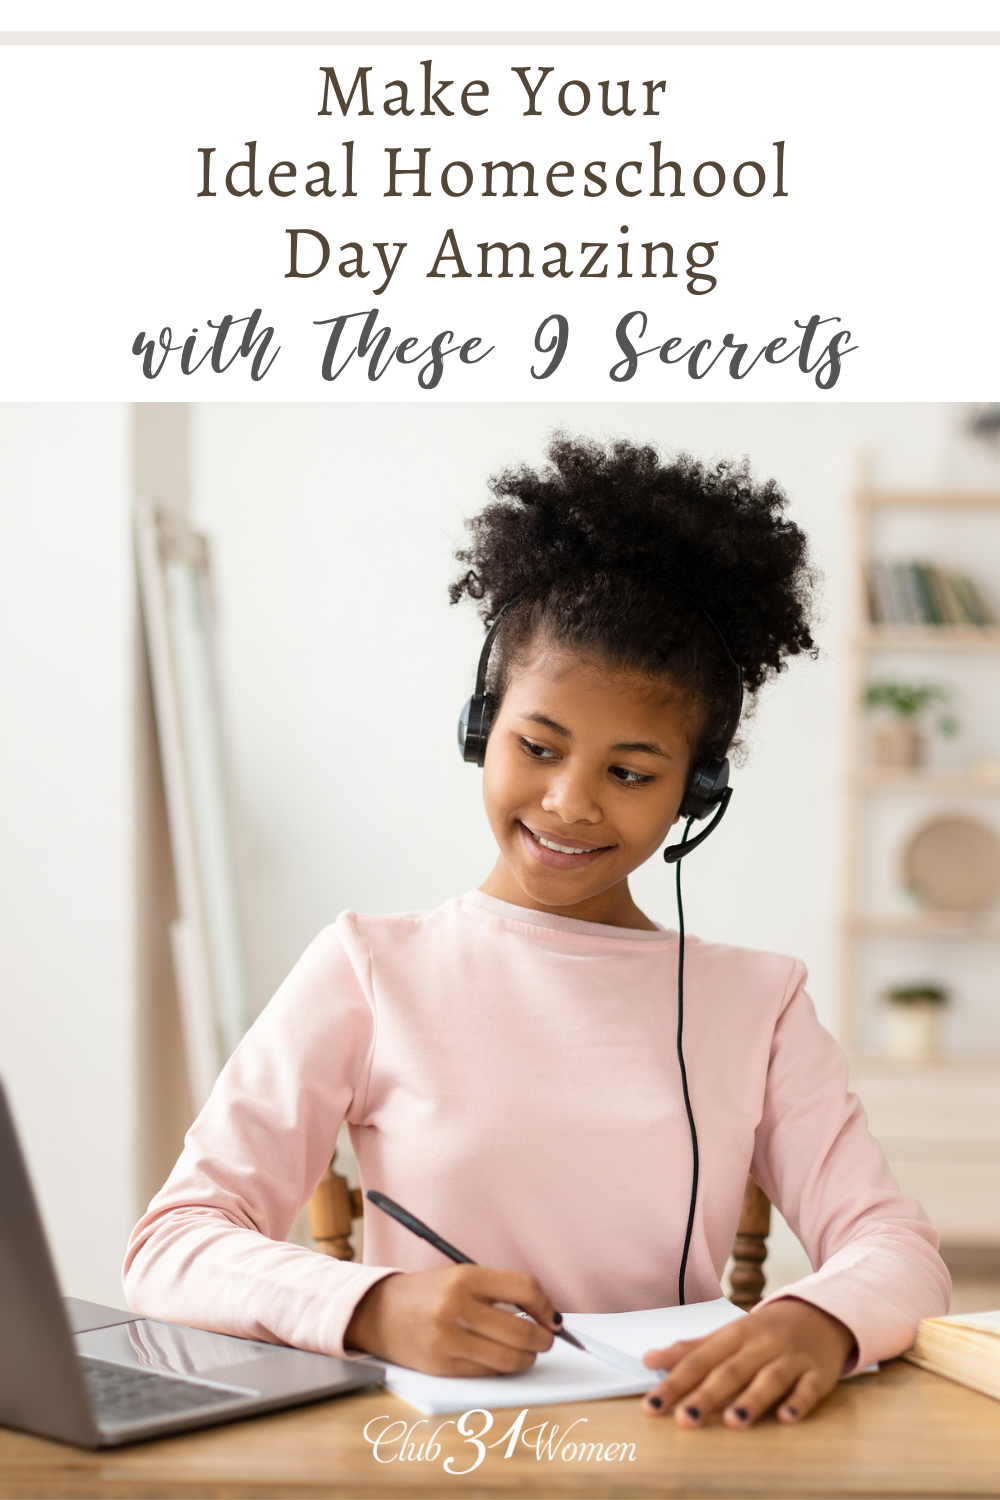 We often overestimate our ideal homeschool day, sending us into a frenzy of stress and overwhelming ourselves and our children. Simplify it. via @Club31Women